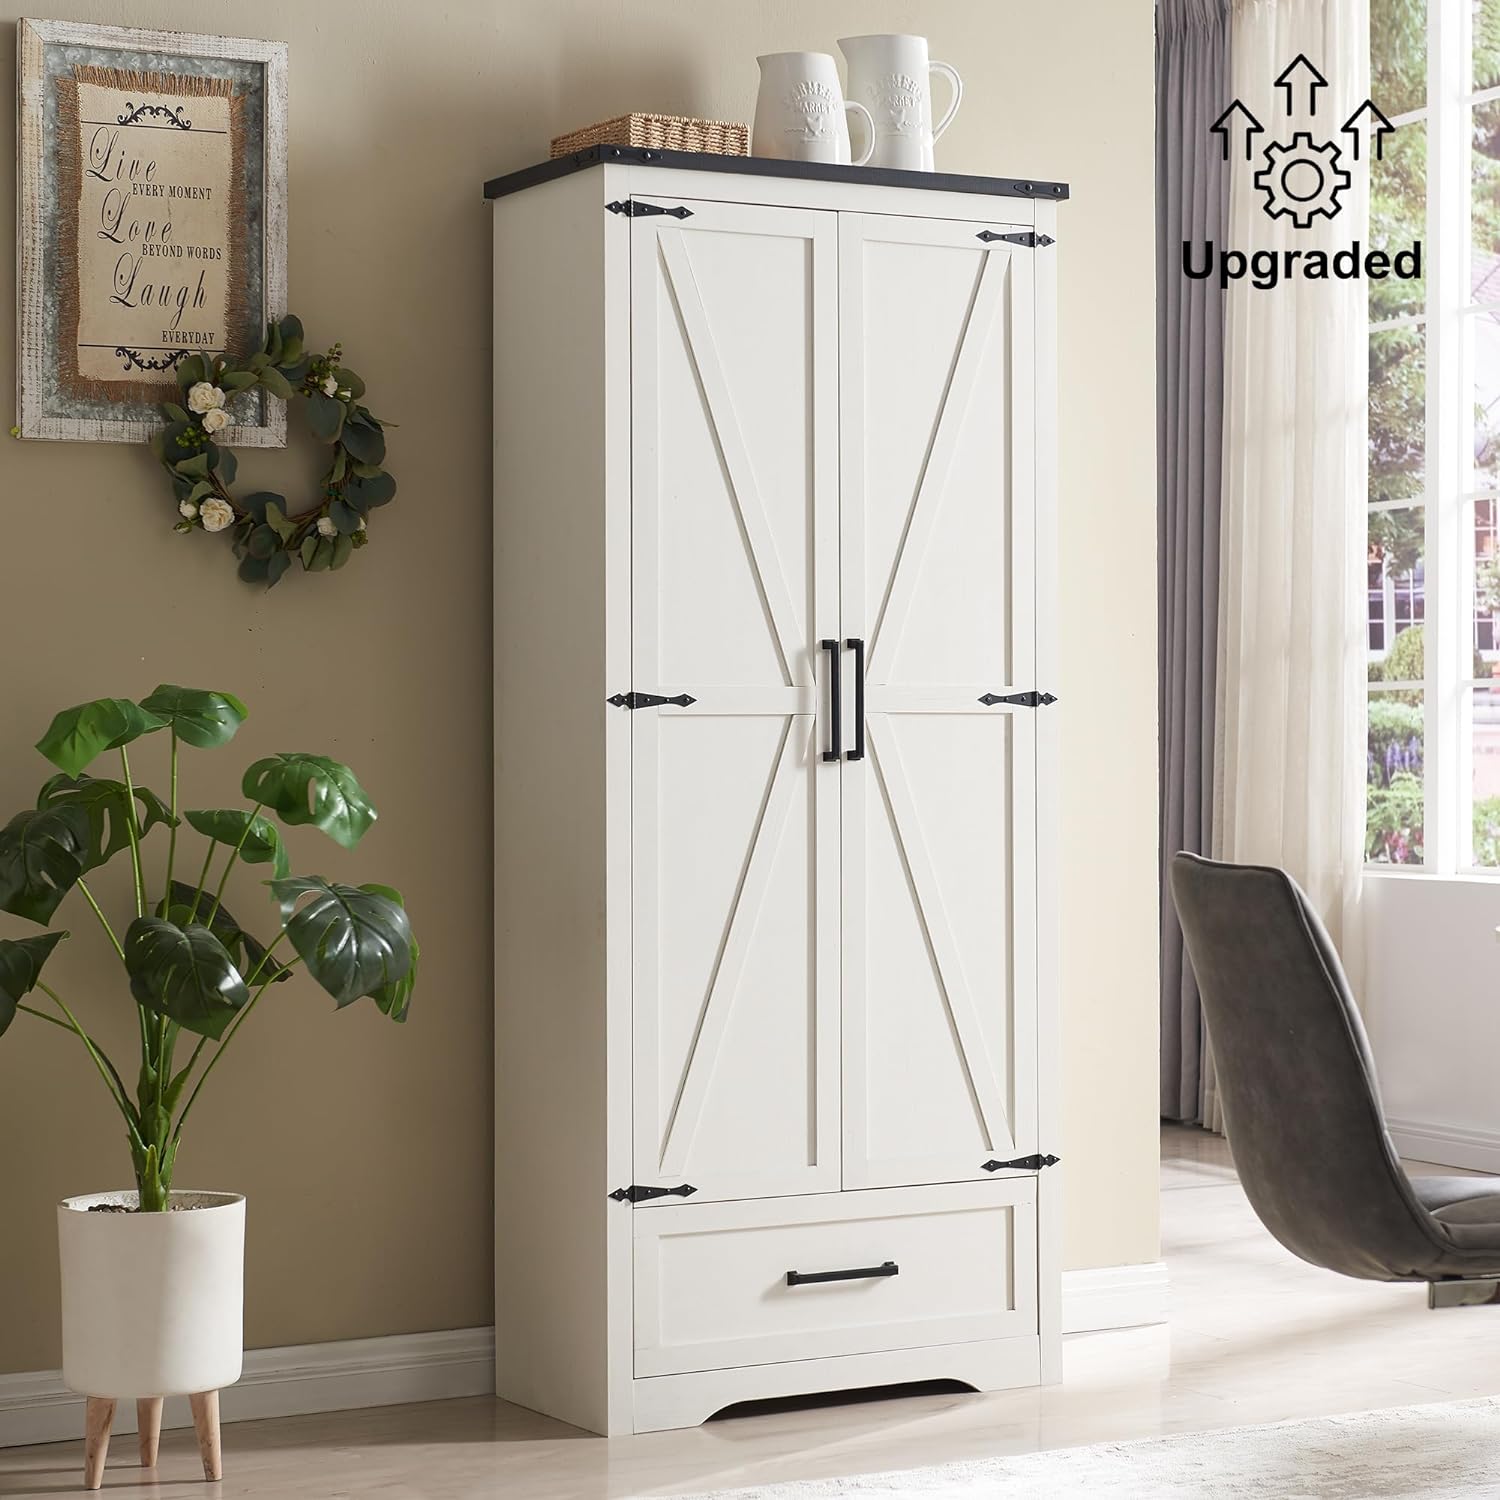 JXQTLINGMU Farmhouse Storage Cabinet with Adjustable Shelves, 72 Tall Pantry Cabinet with Drawer & 2 Barn Doors, Versatile Storage for Kitchen, Dining Room, Bathroom, Living Room, Antique White